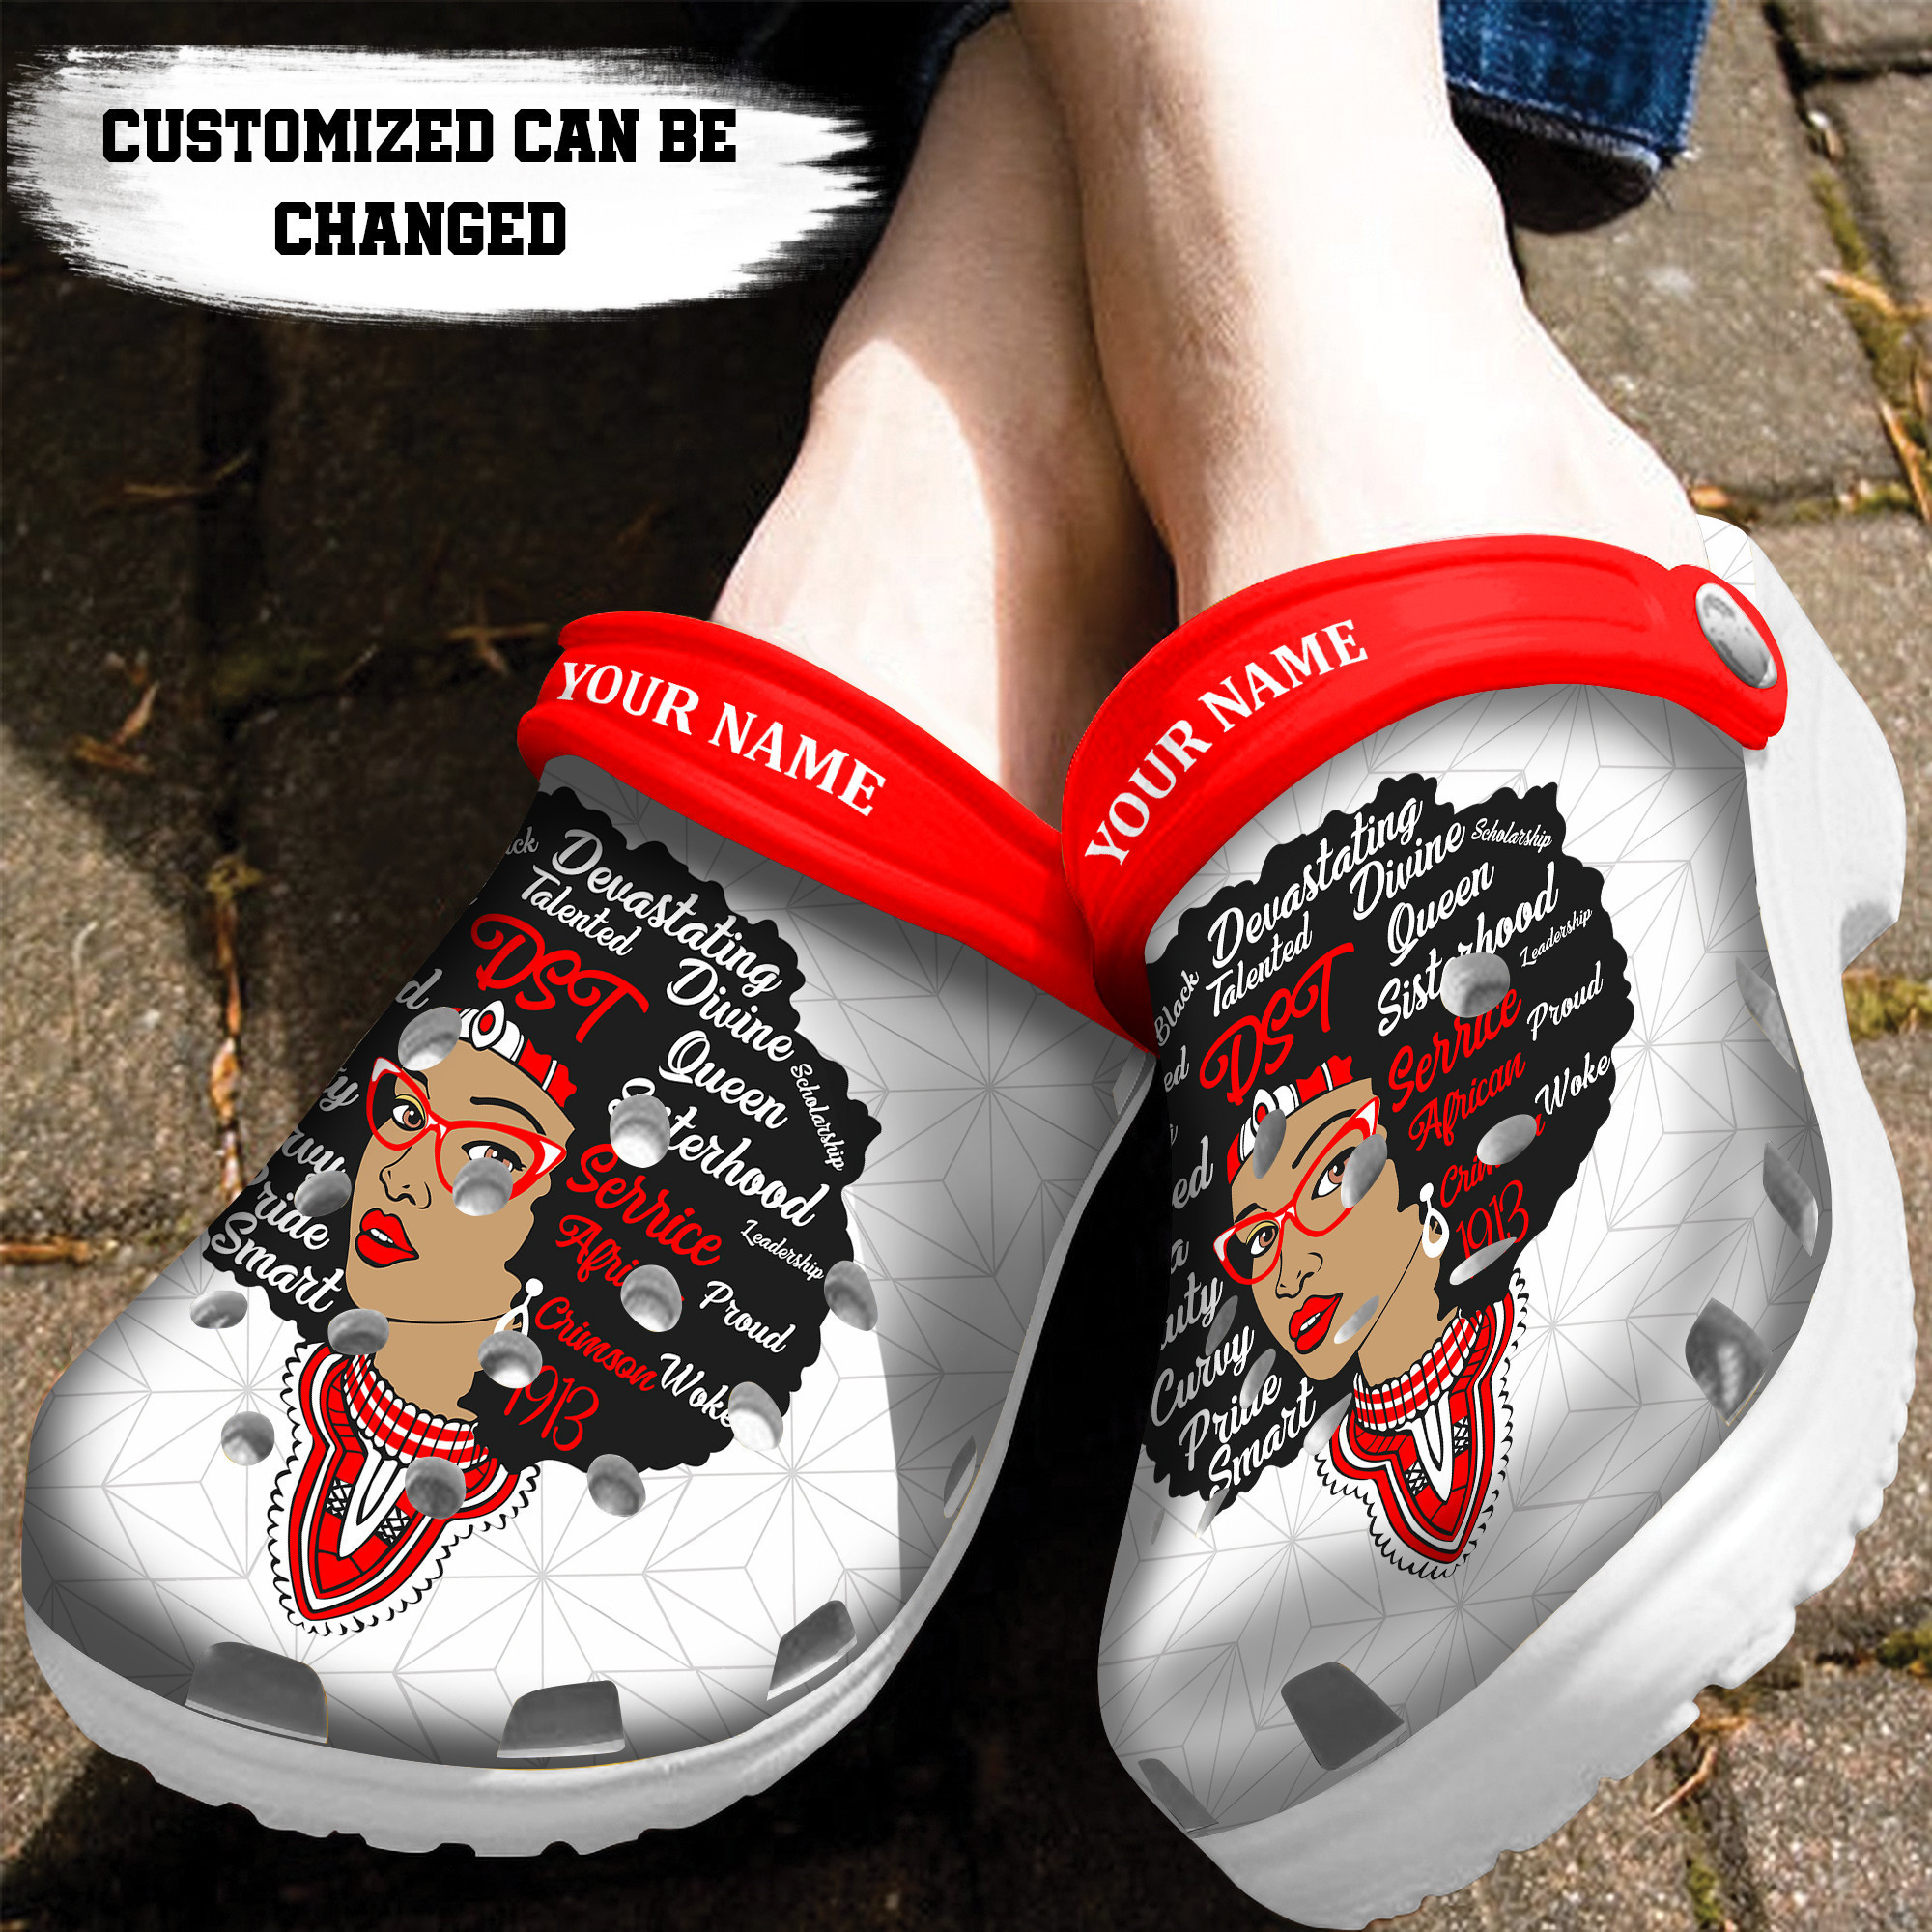 Custom Crocss Personalized Dst Queen Clog Shoes For Men Women Kids ...